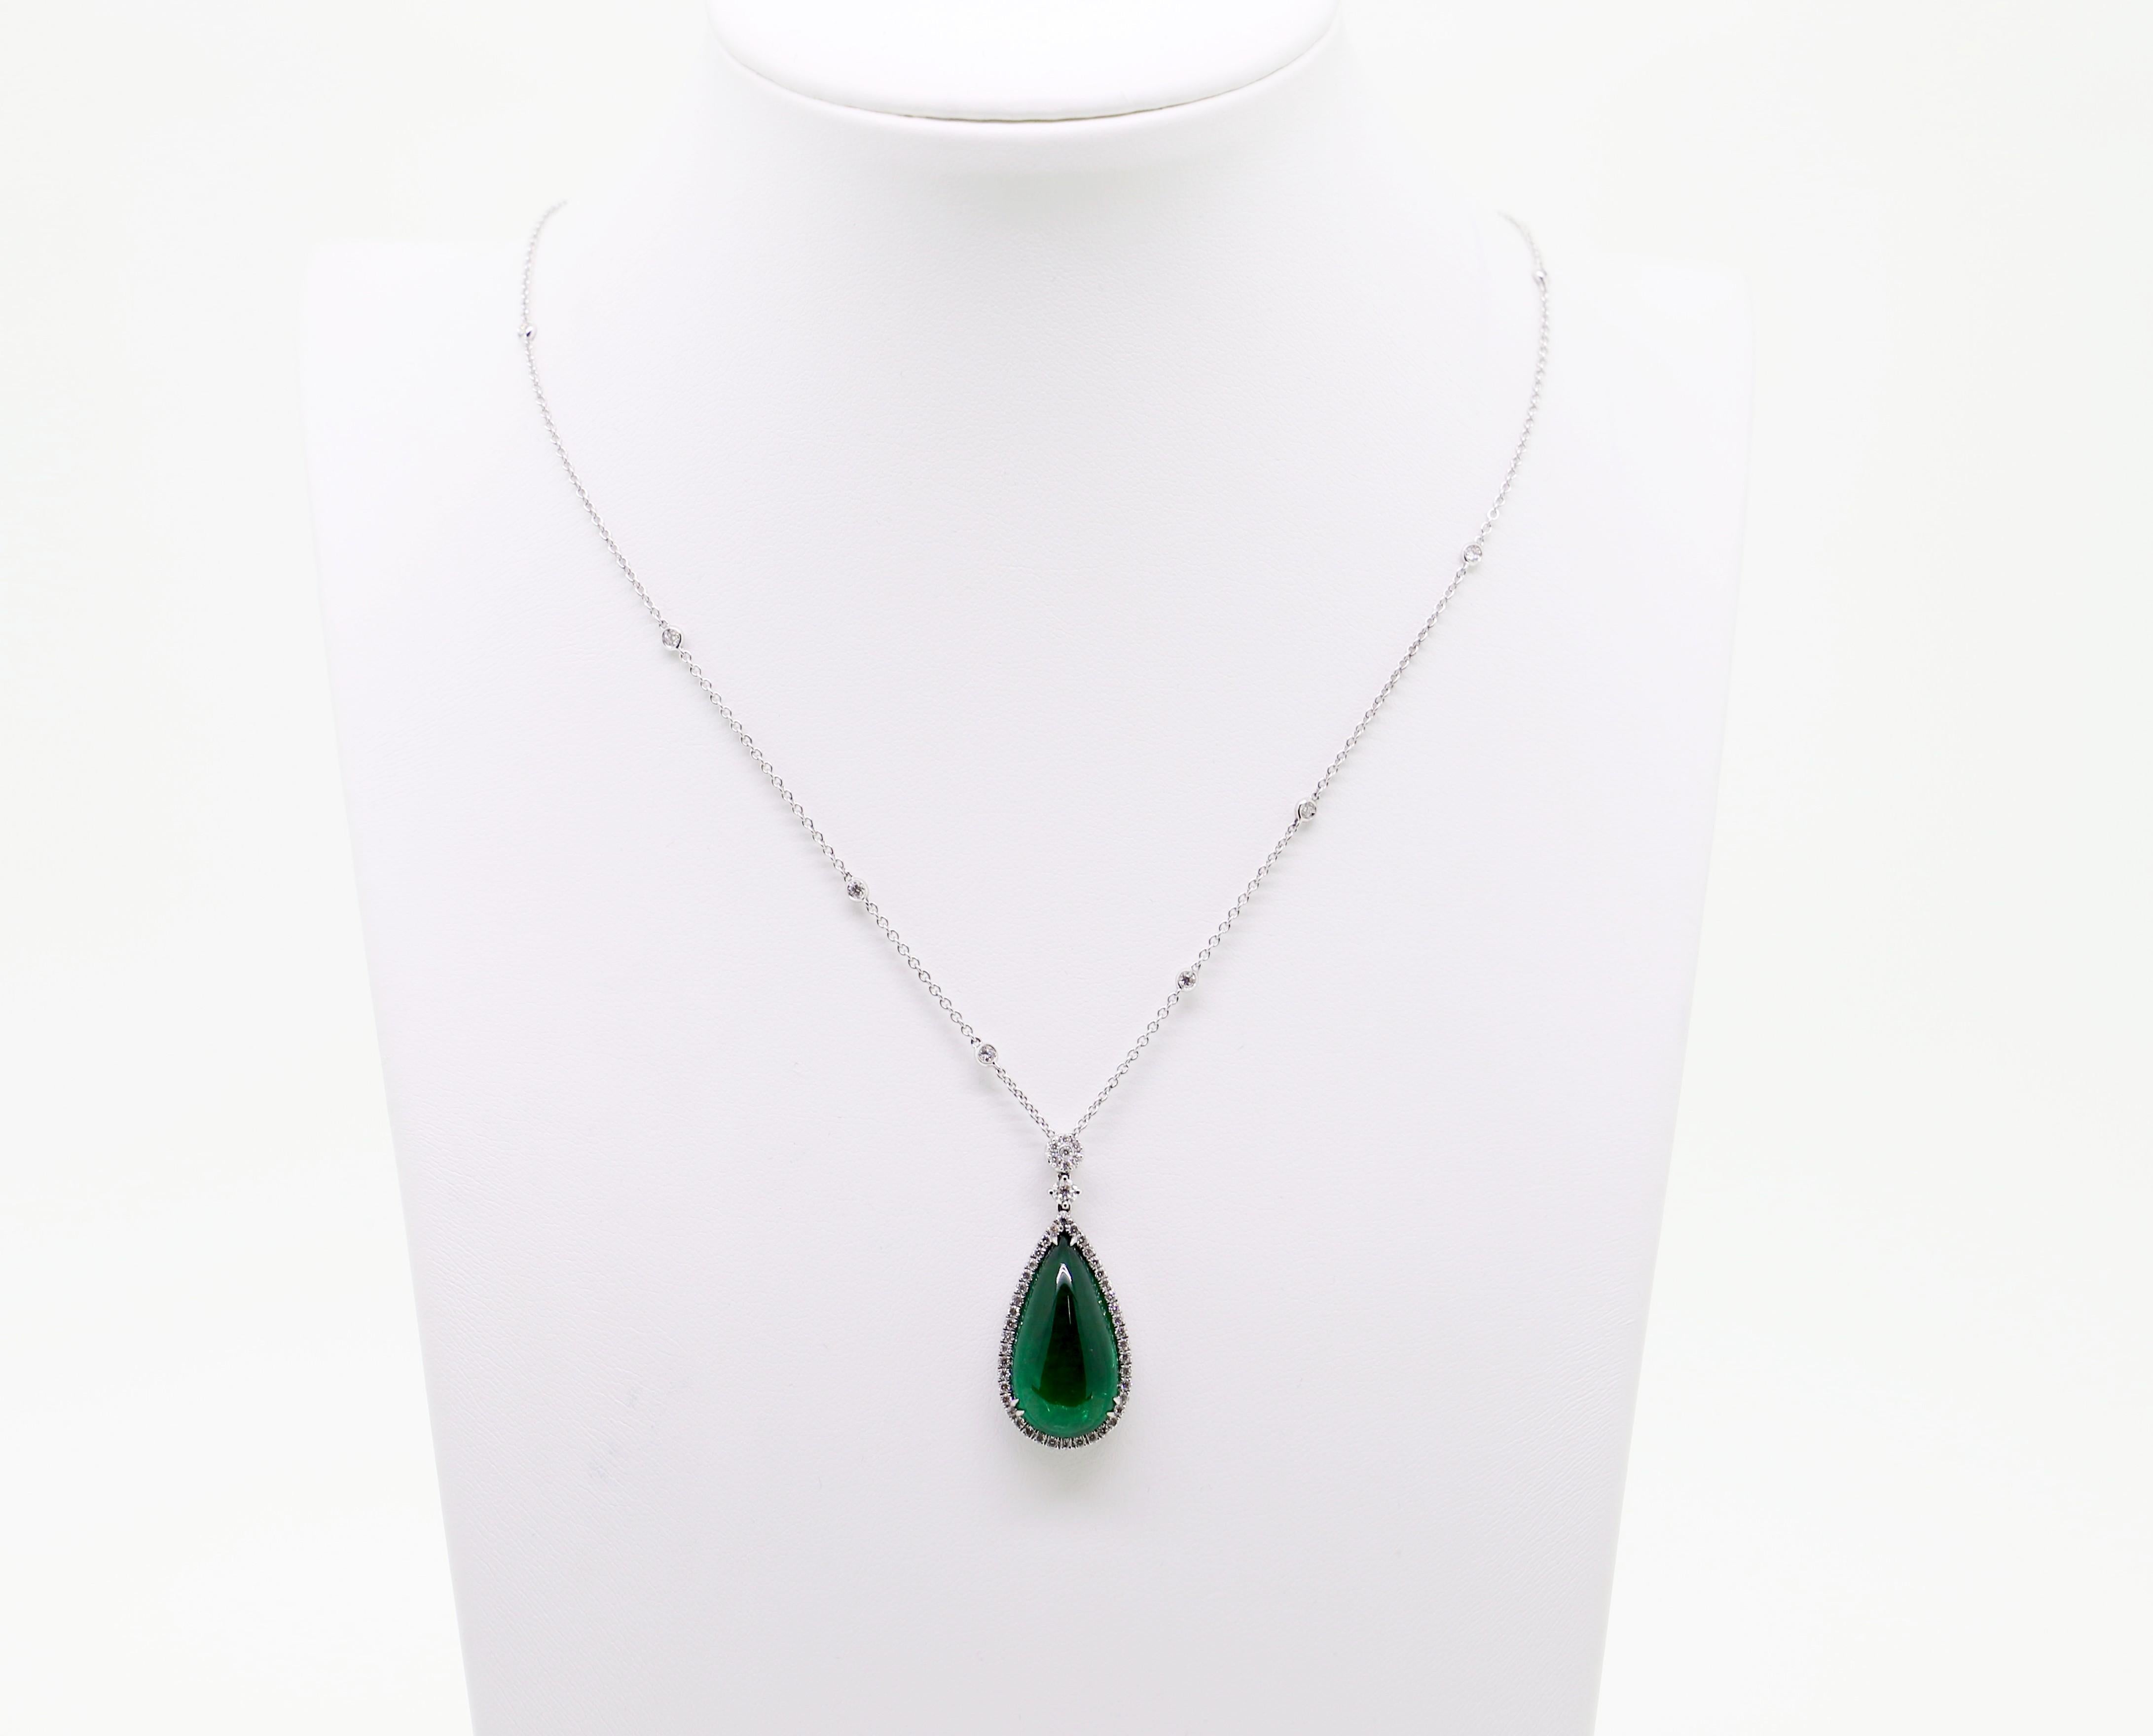 Contemporary 13.28 Carat Emerald Cabouchon with White Diamonds Pendant Necklace For Sale